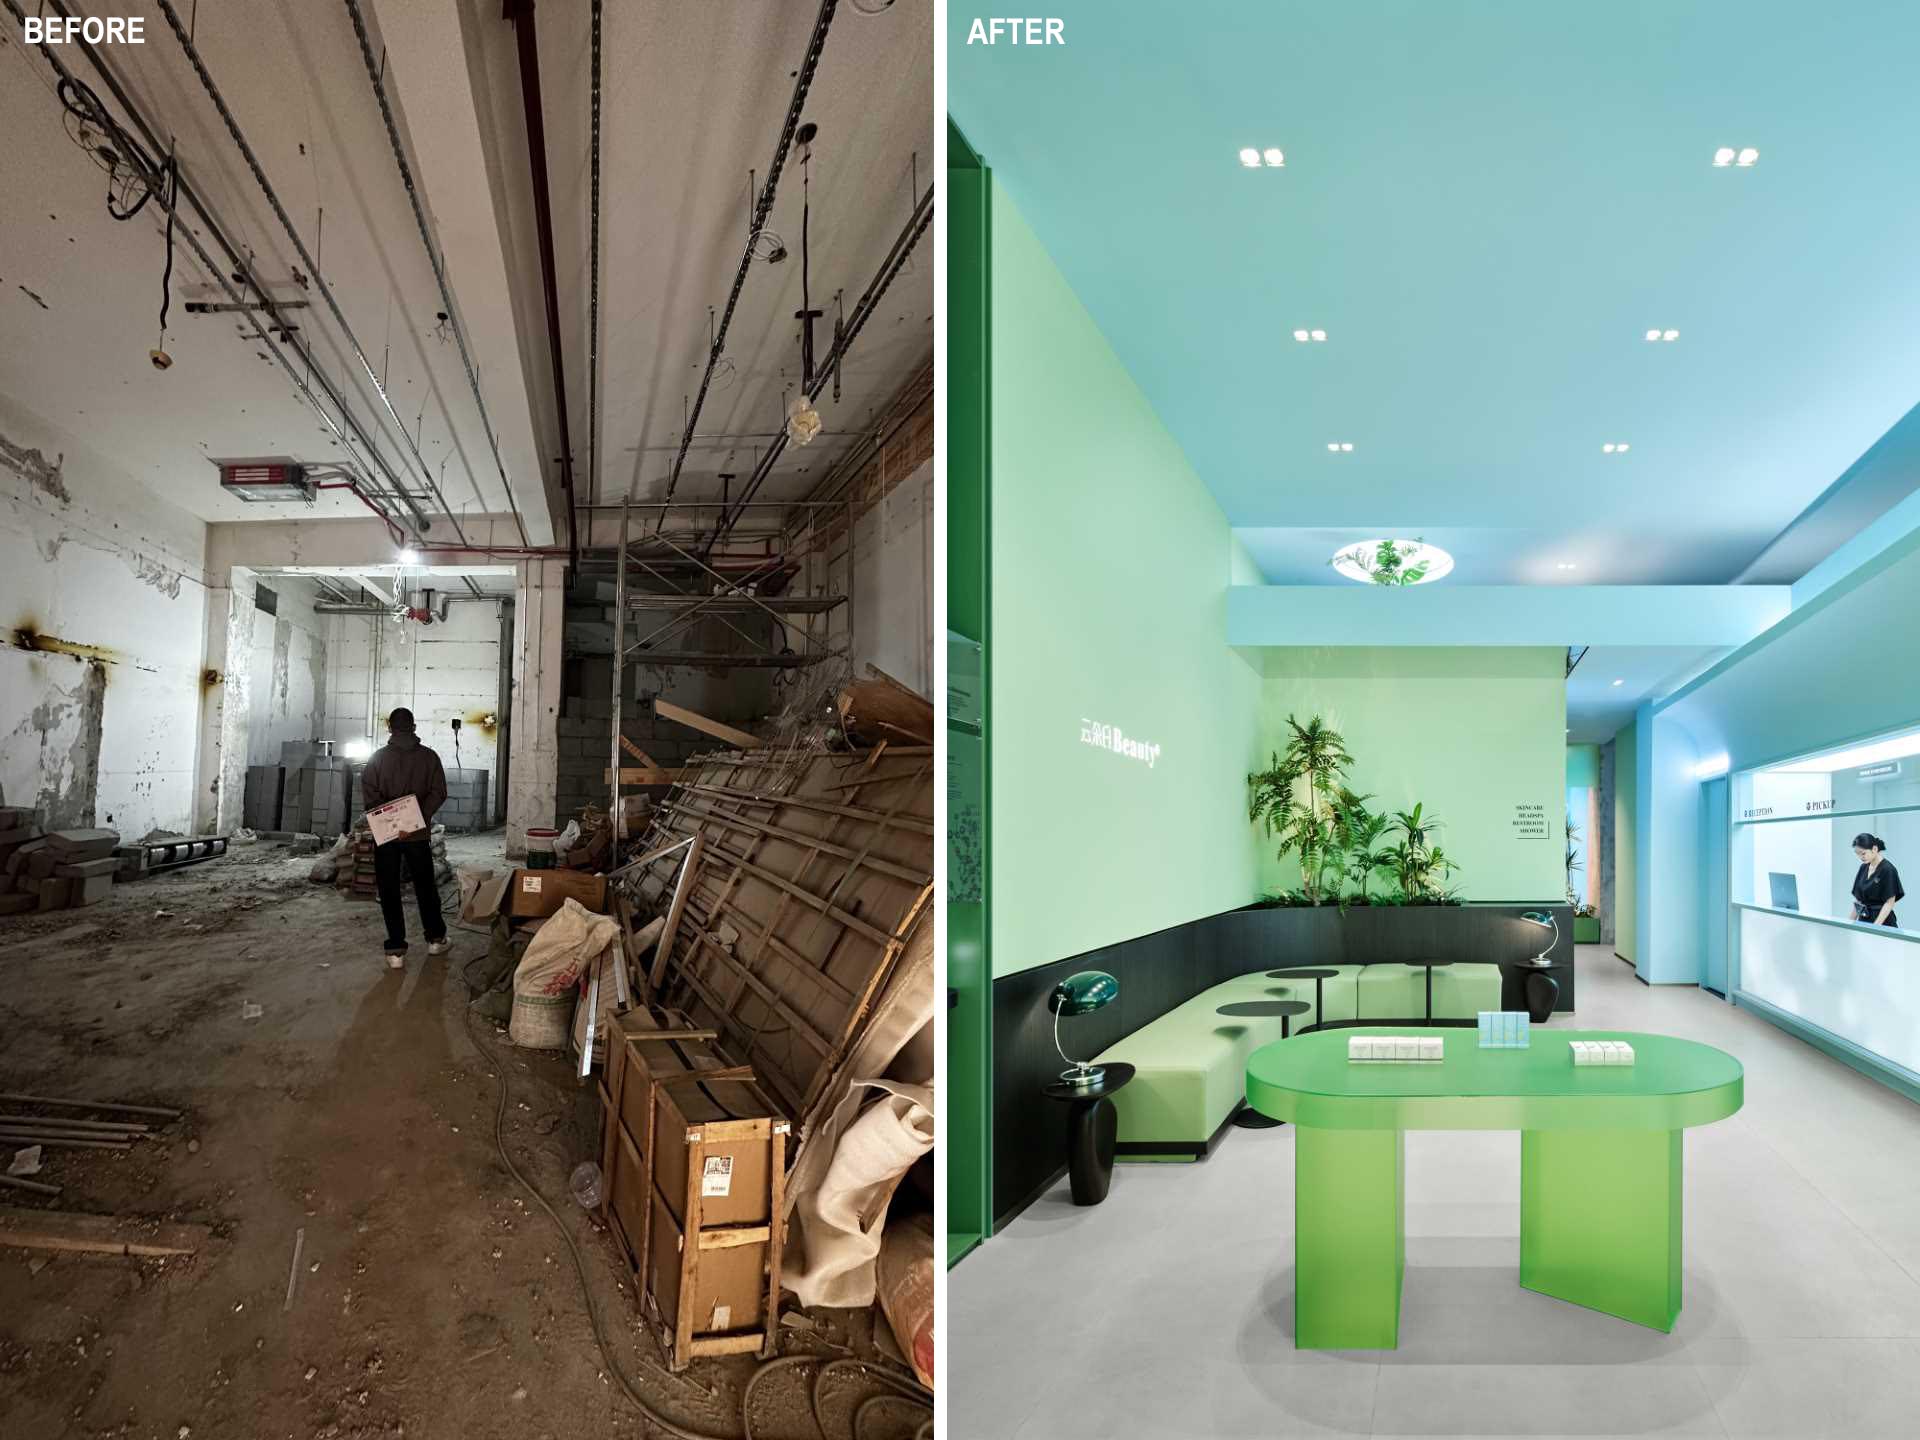 Seizing the opportunity to use color, the designers continued the green facade color through to the interior and the reception area, where it meets a soft blue, creating a sense of calm. 